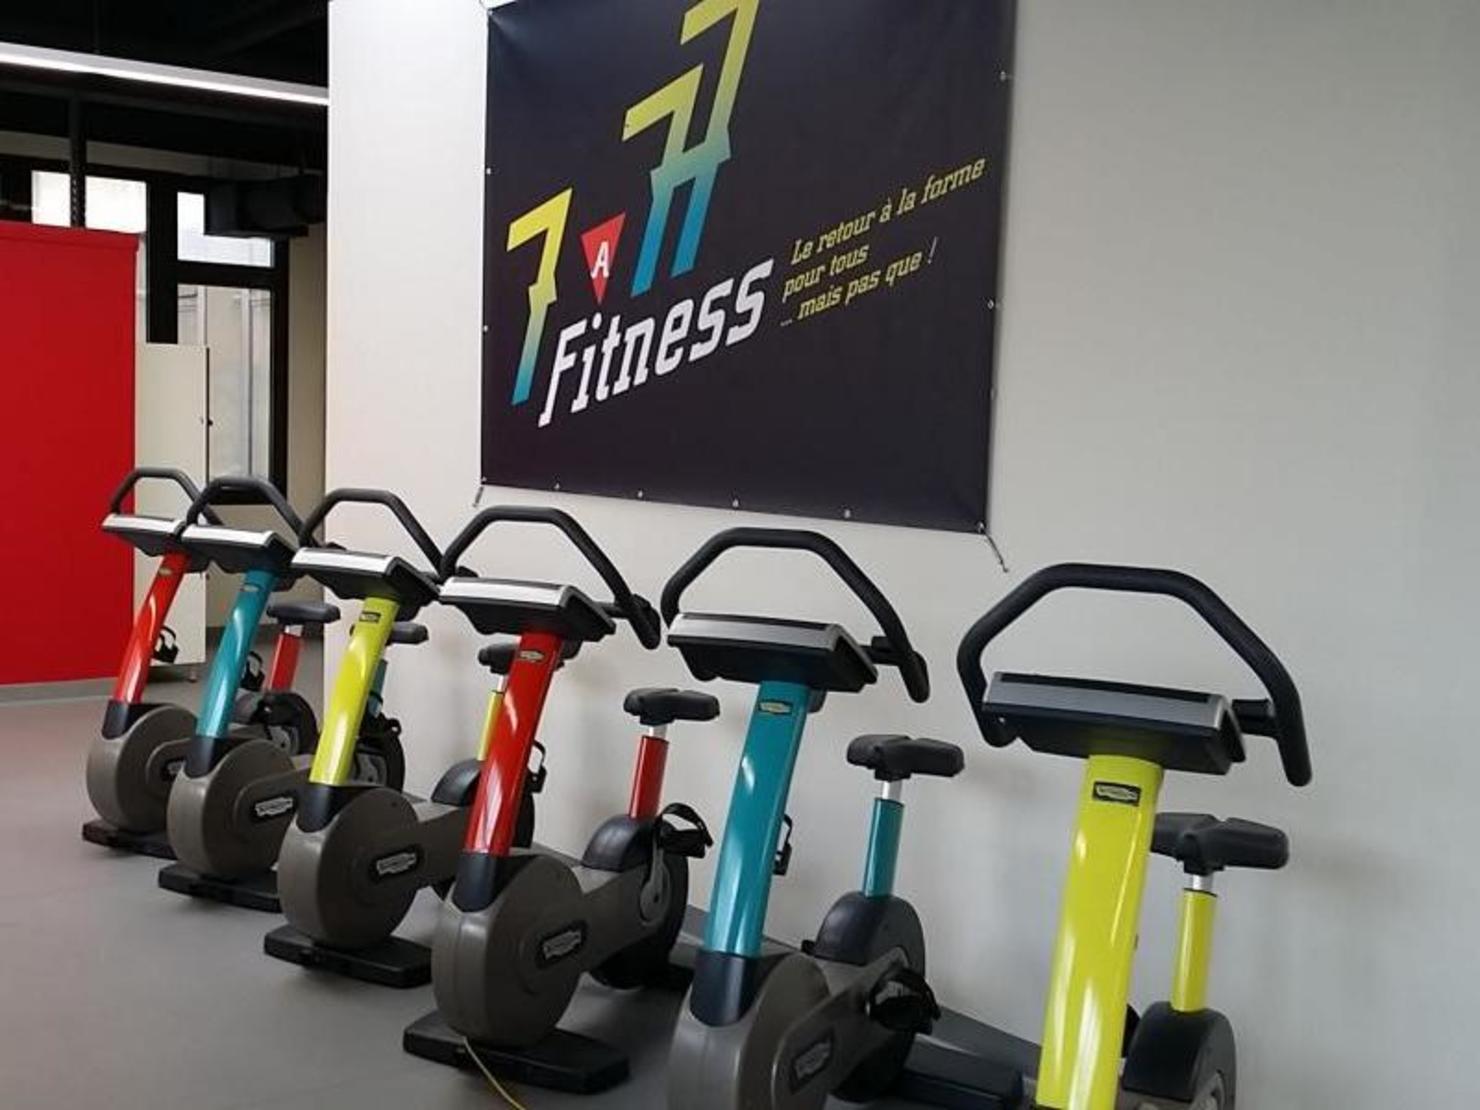 7 A 77 FITNESS